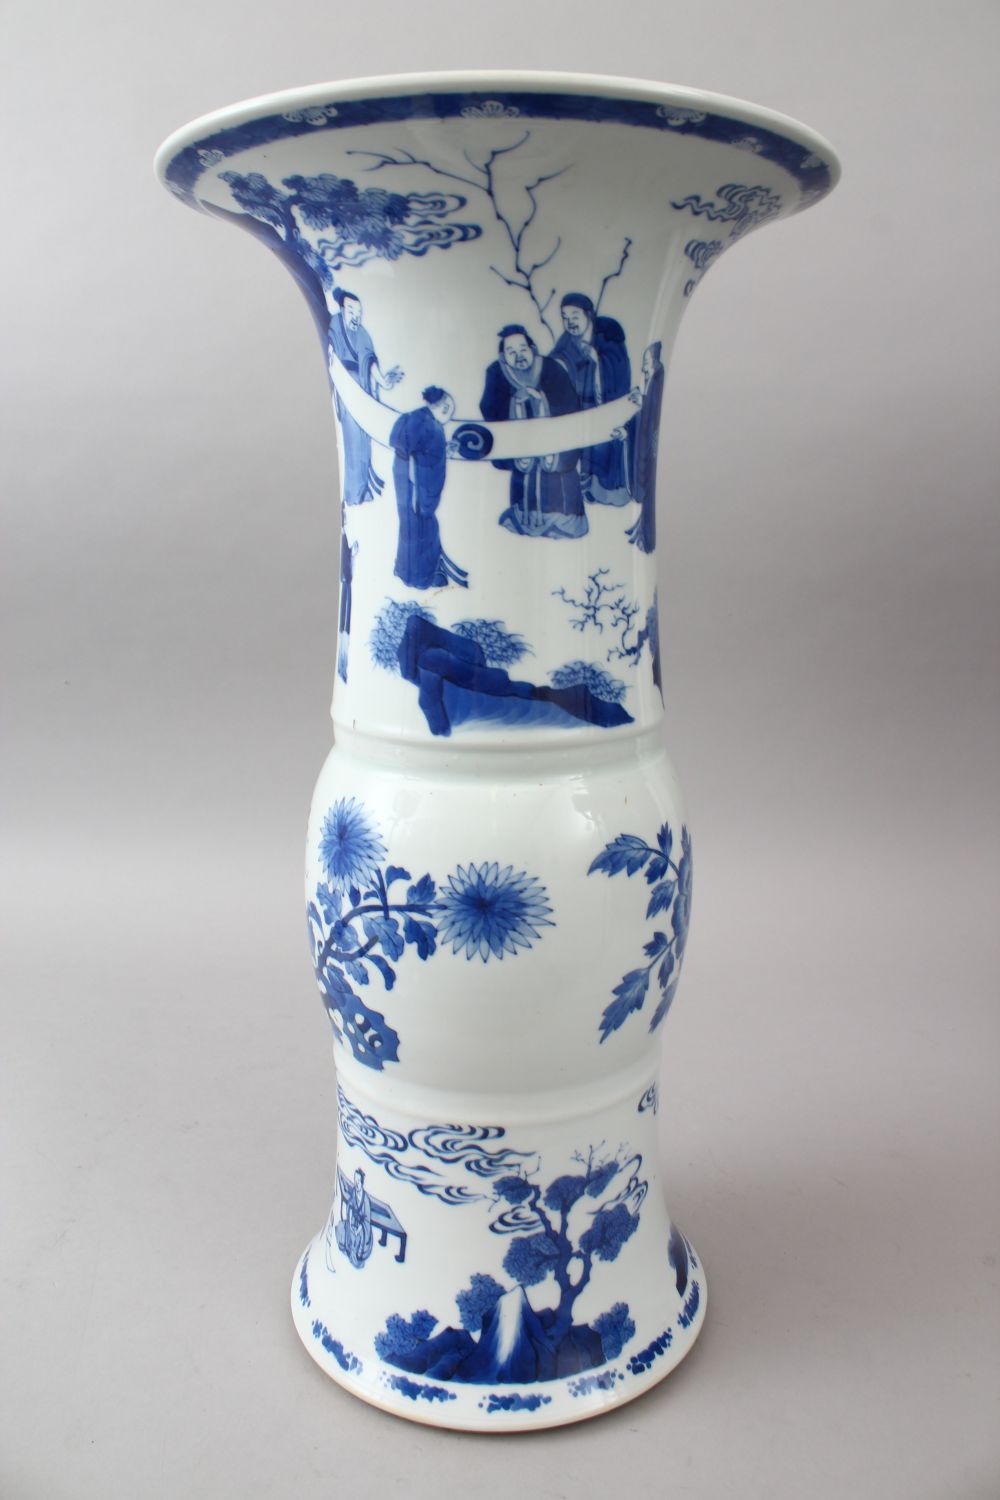 A LARGE CHINESE BLUE & WHITE PORCELAIN YEN YEN VASE, the body of the vase decorated with scenes of - Image 3 of 7